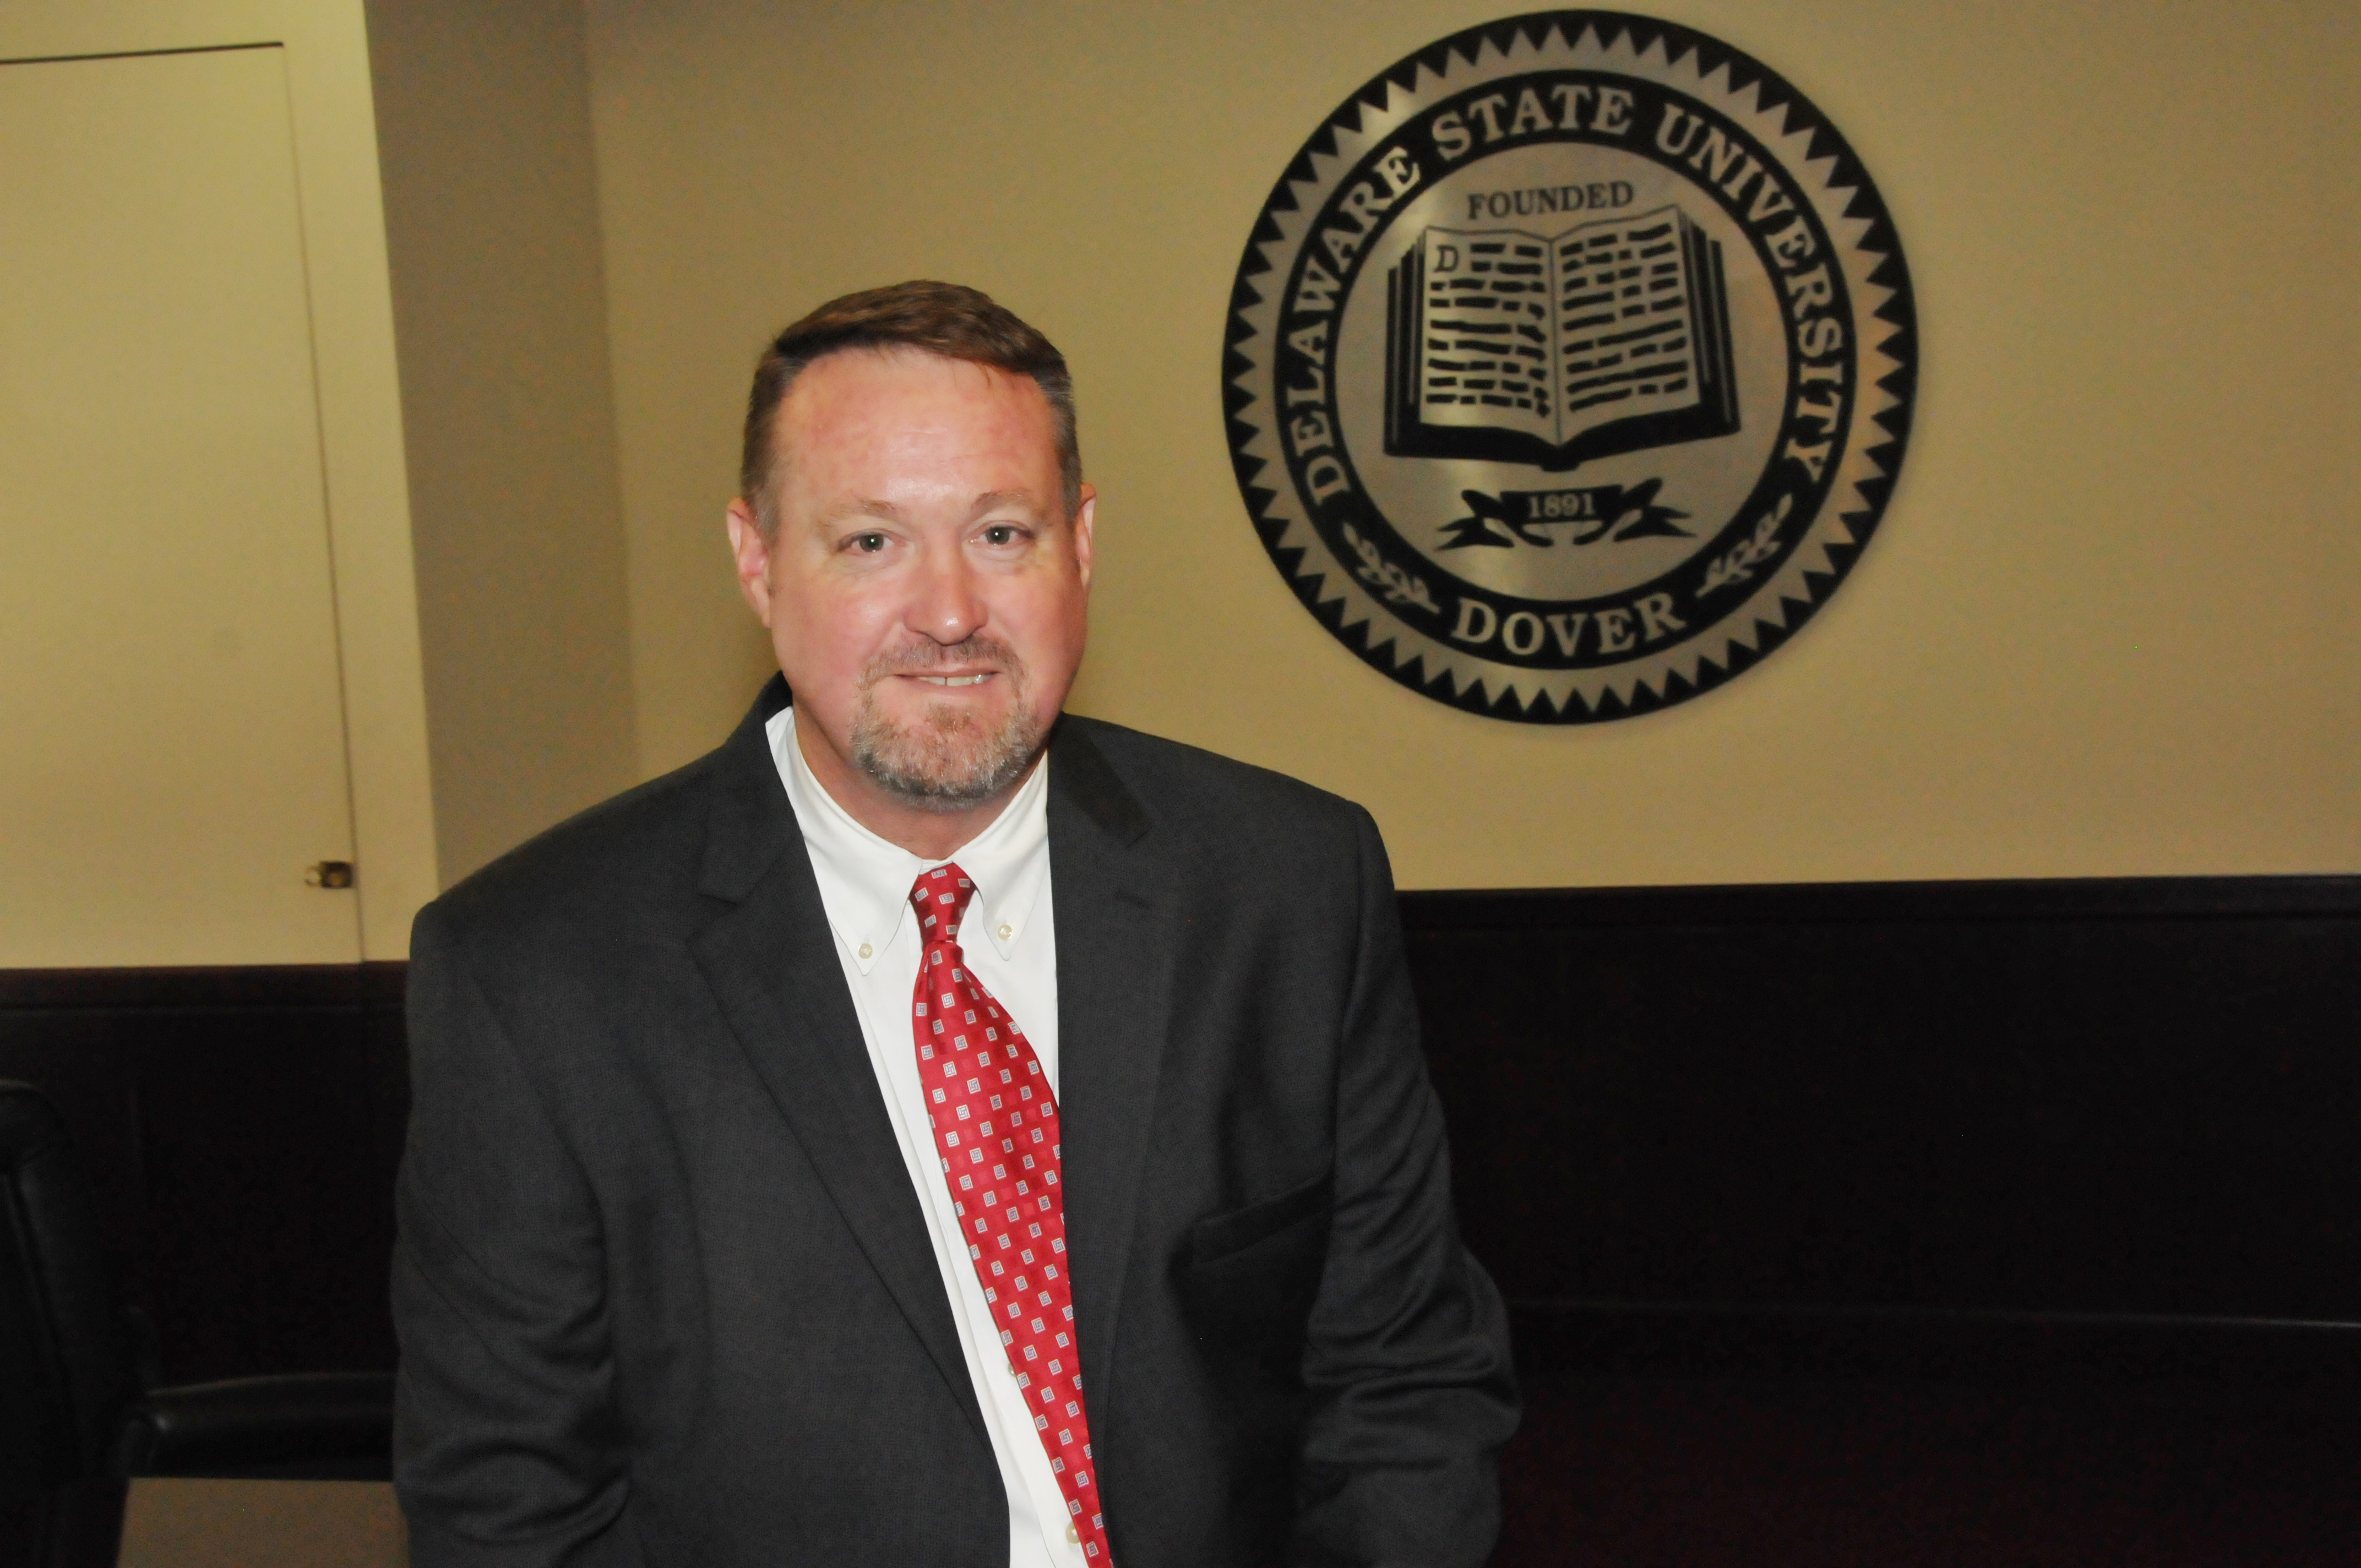 Robert Schrof, the new vice president of finance, brings 25 year of executive finance experience to DSU.